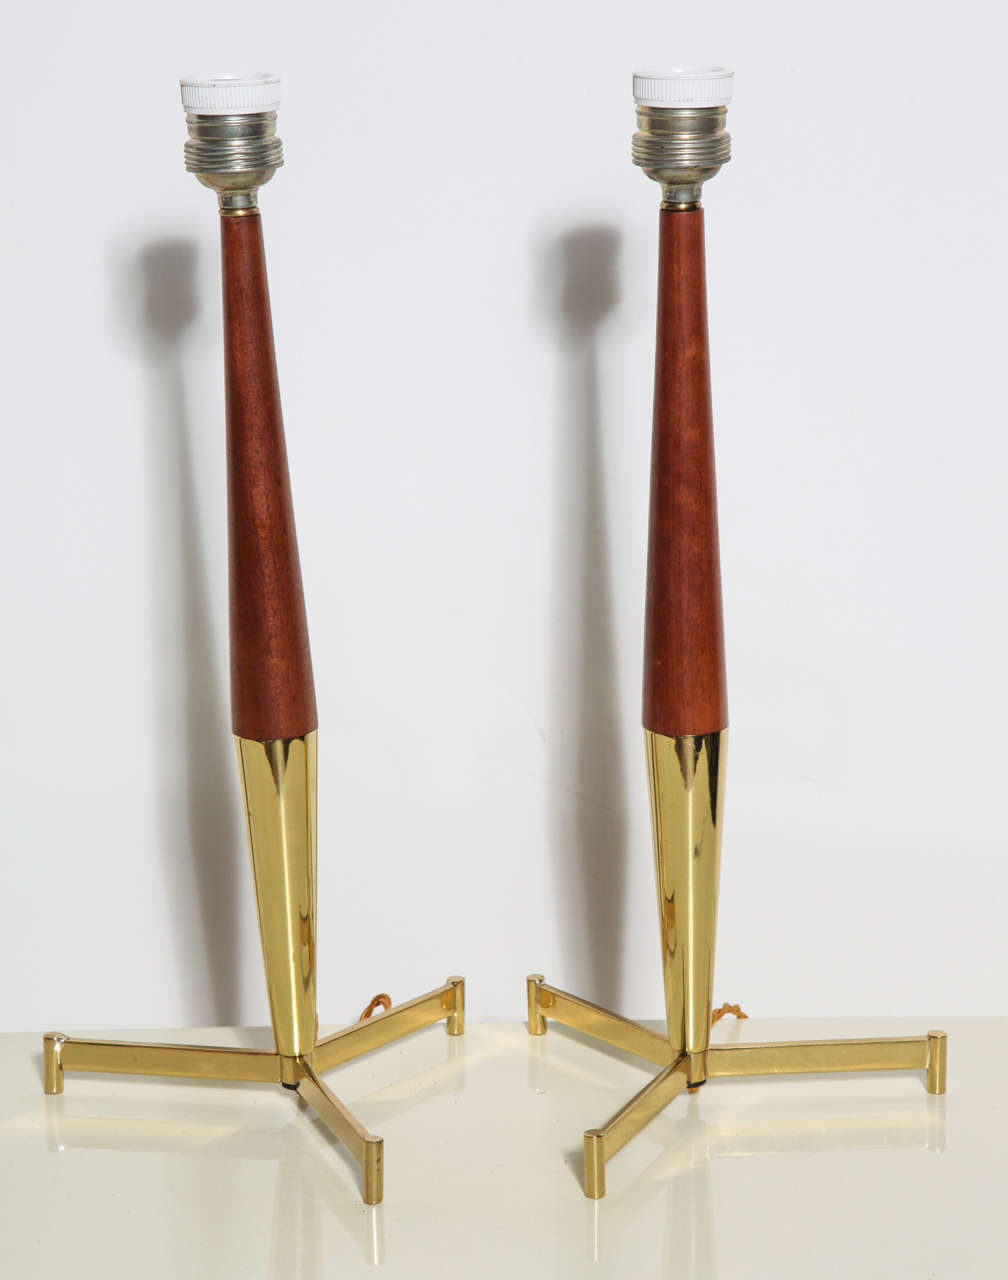 Pair of French Modern Brass and Teak Tripod Candlestick Table Lamps 1